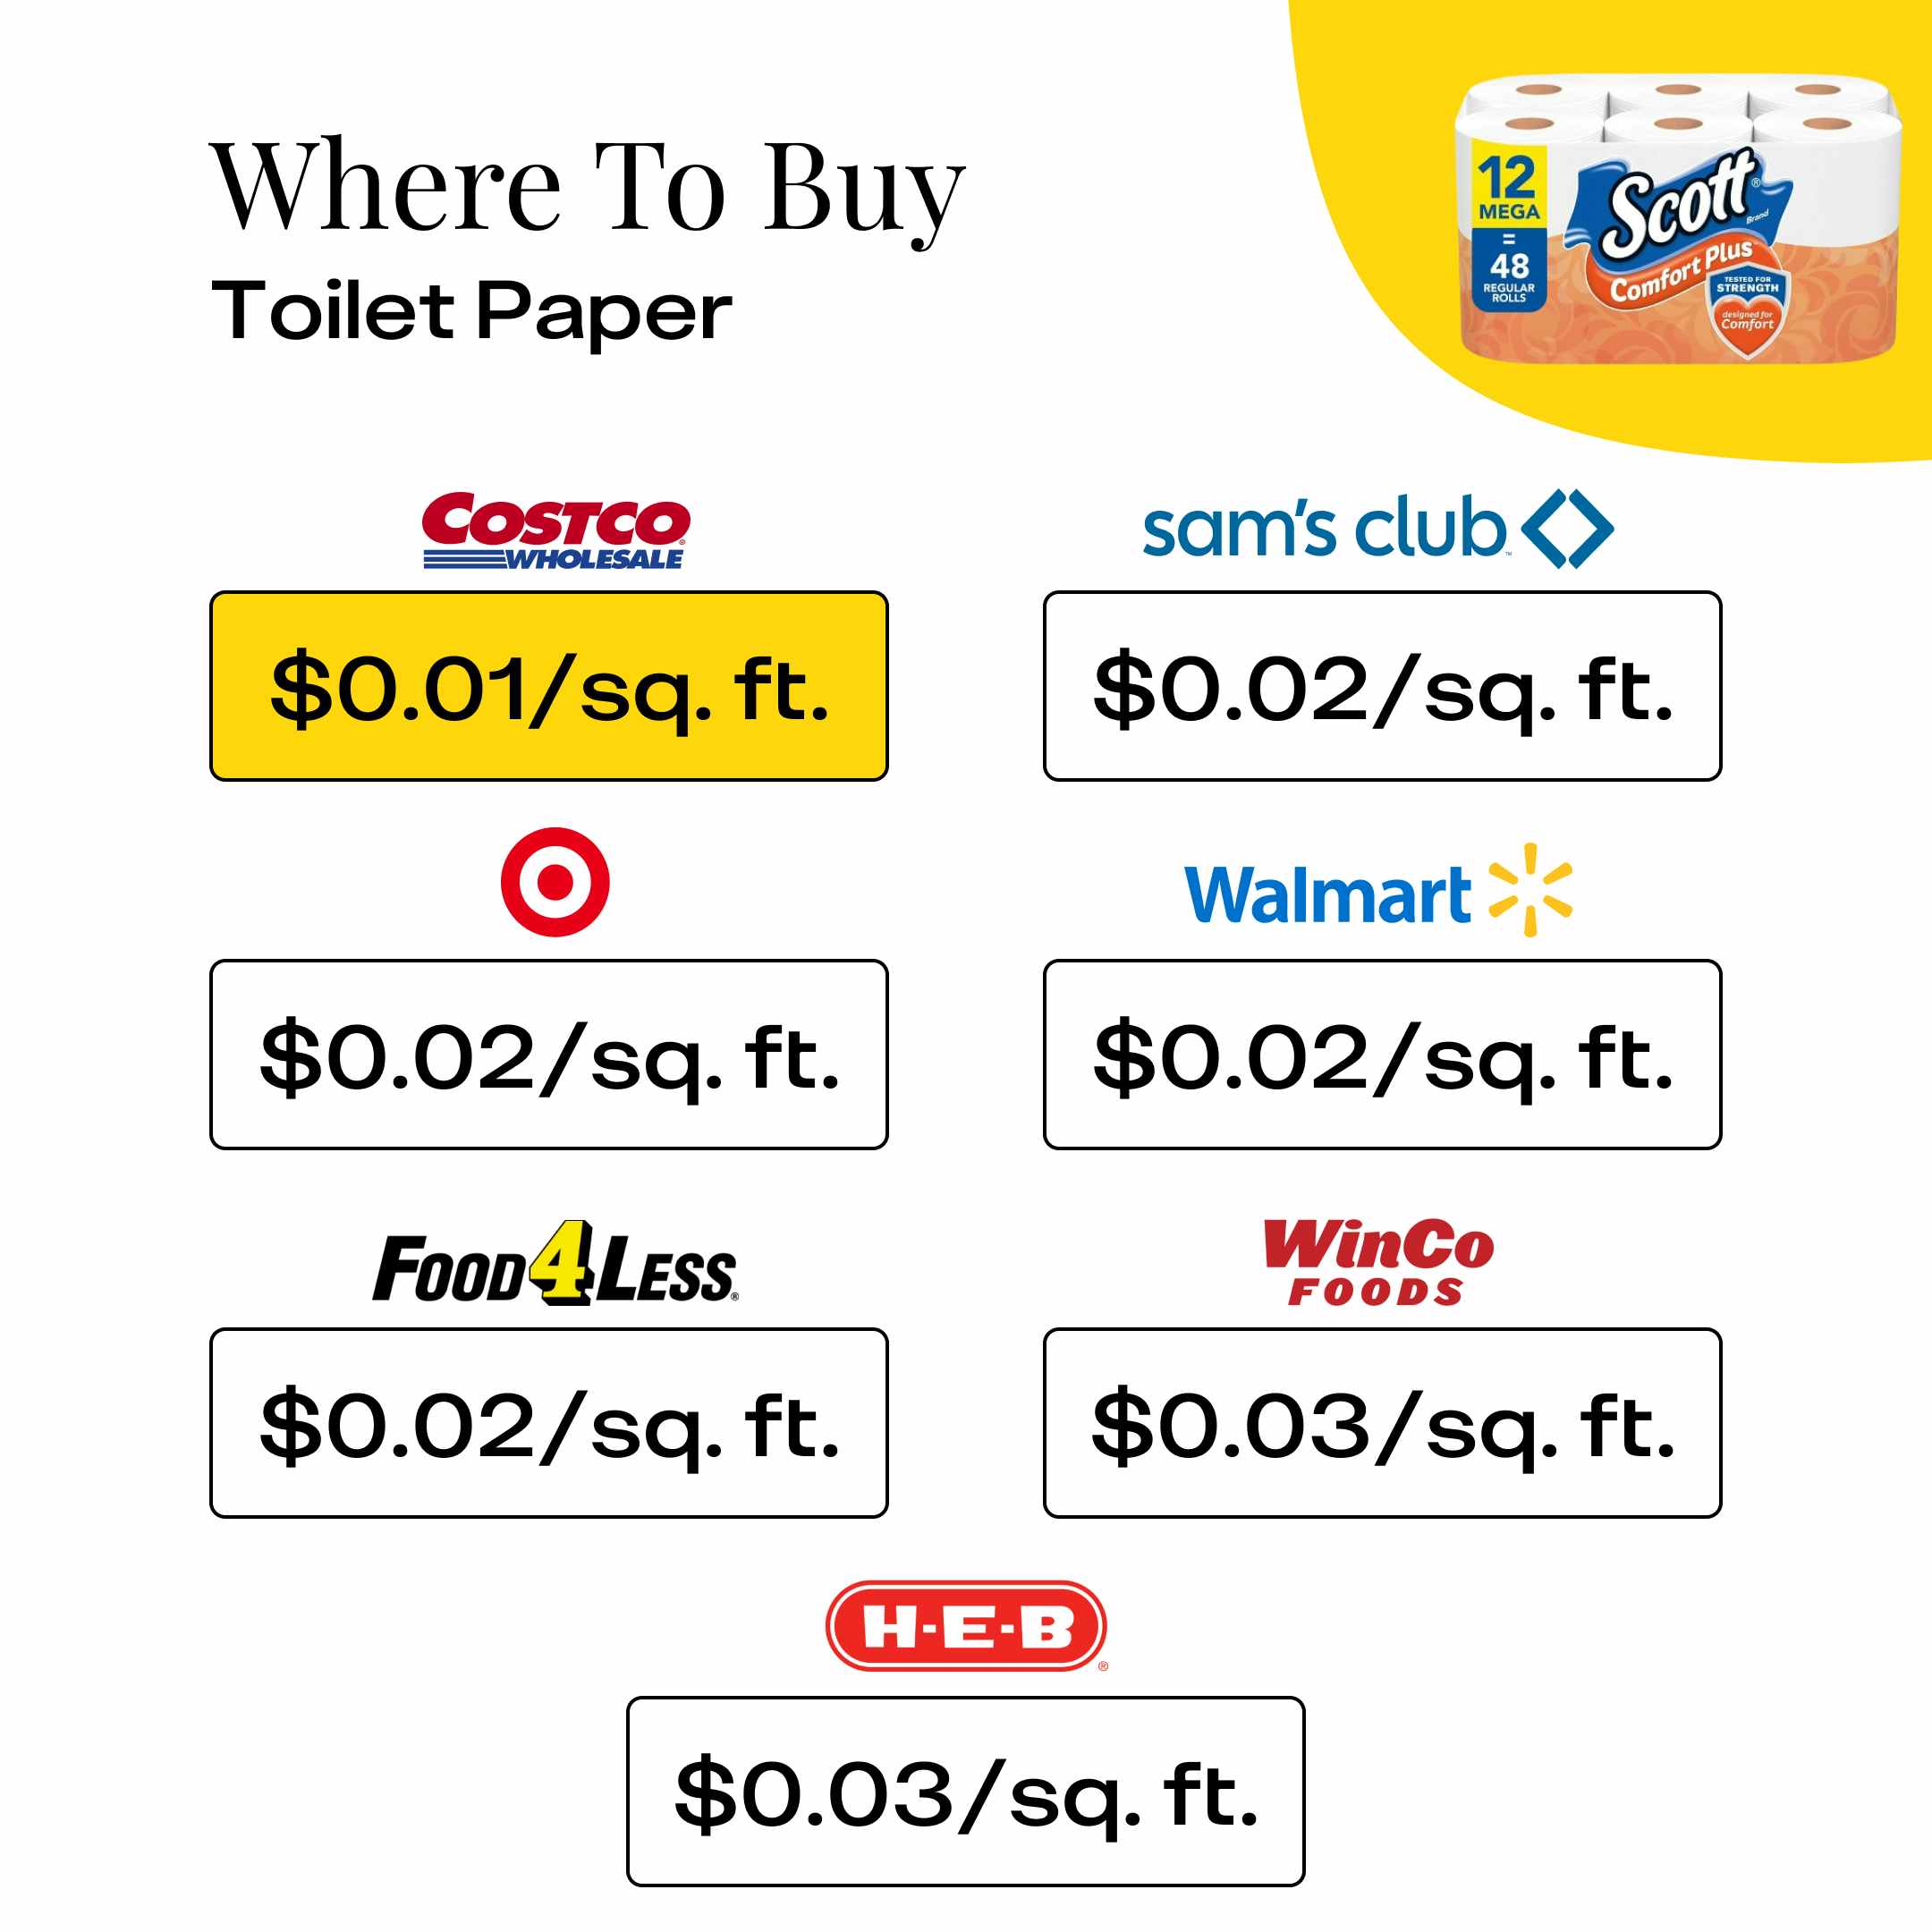 Where To Buy Toilet Paper